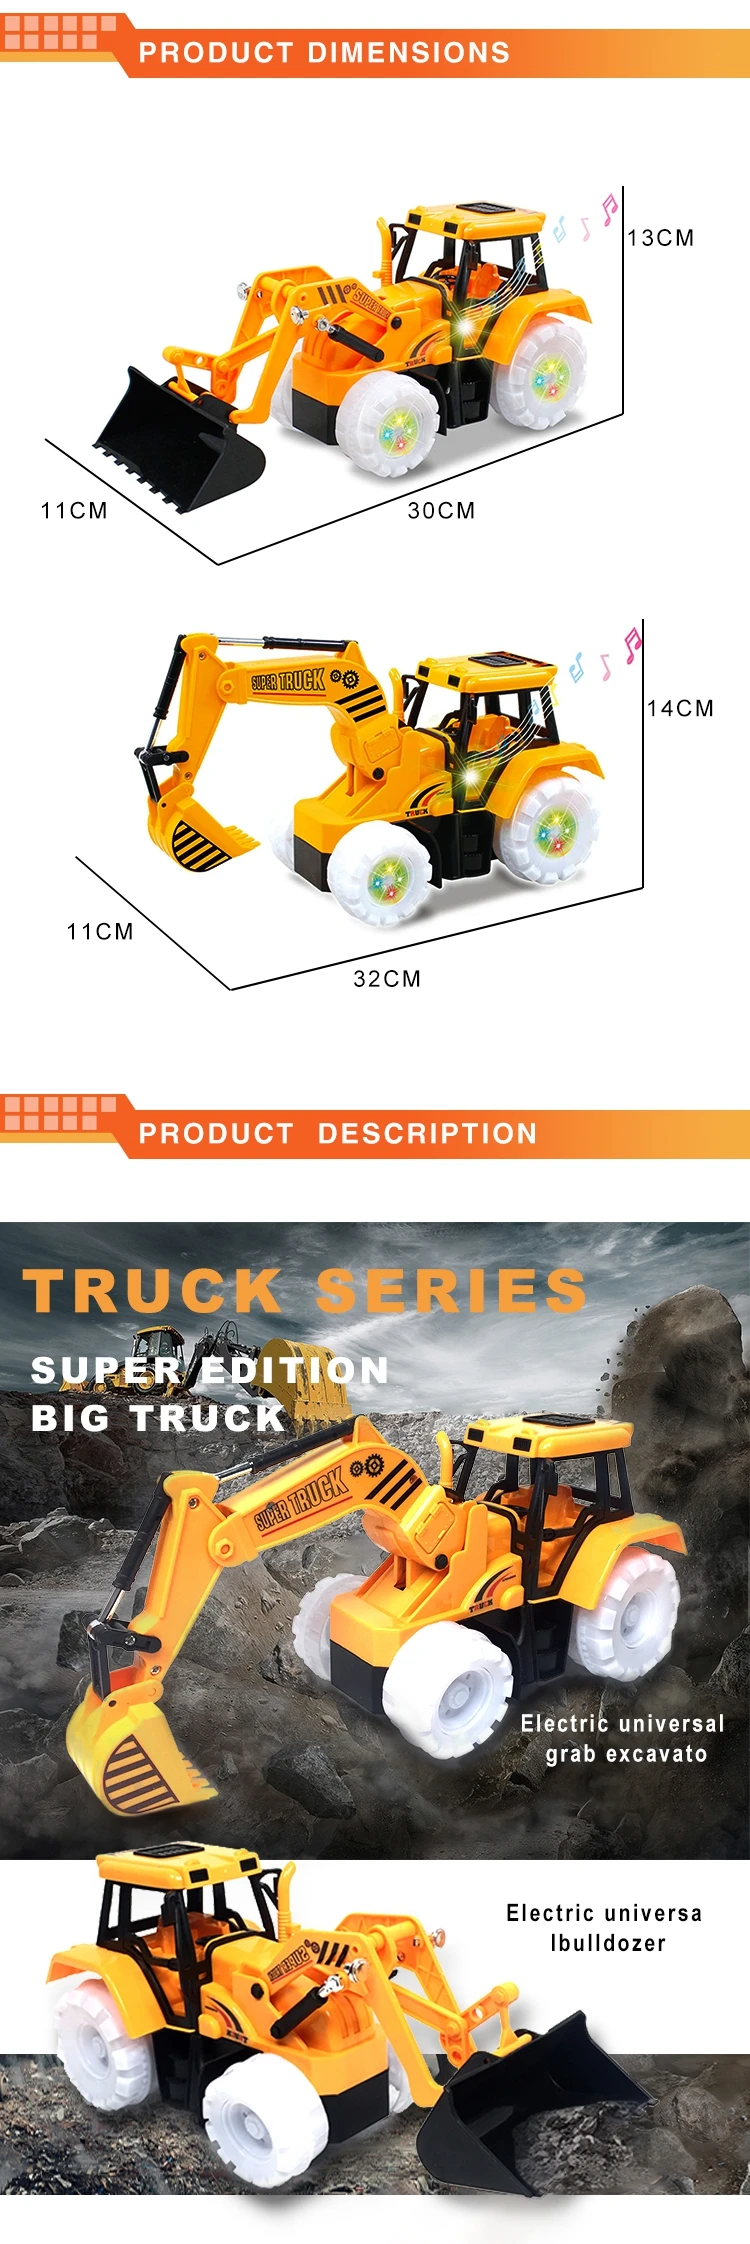 Wholesale electric excavator model construction vehicles toy with light music